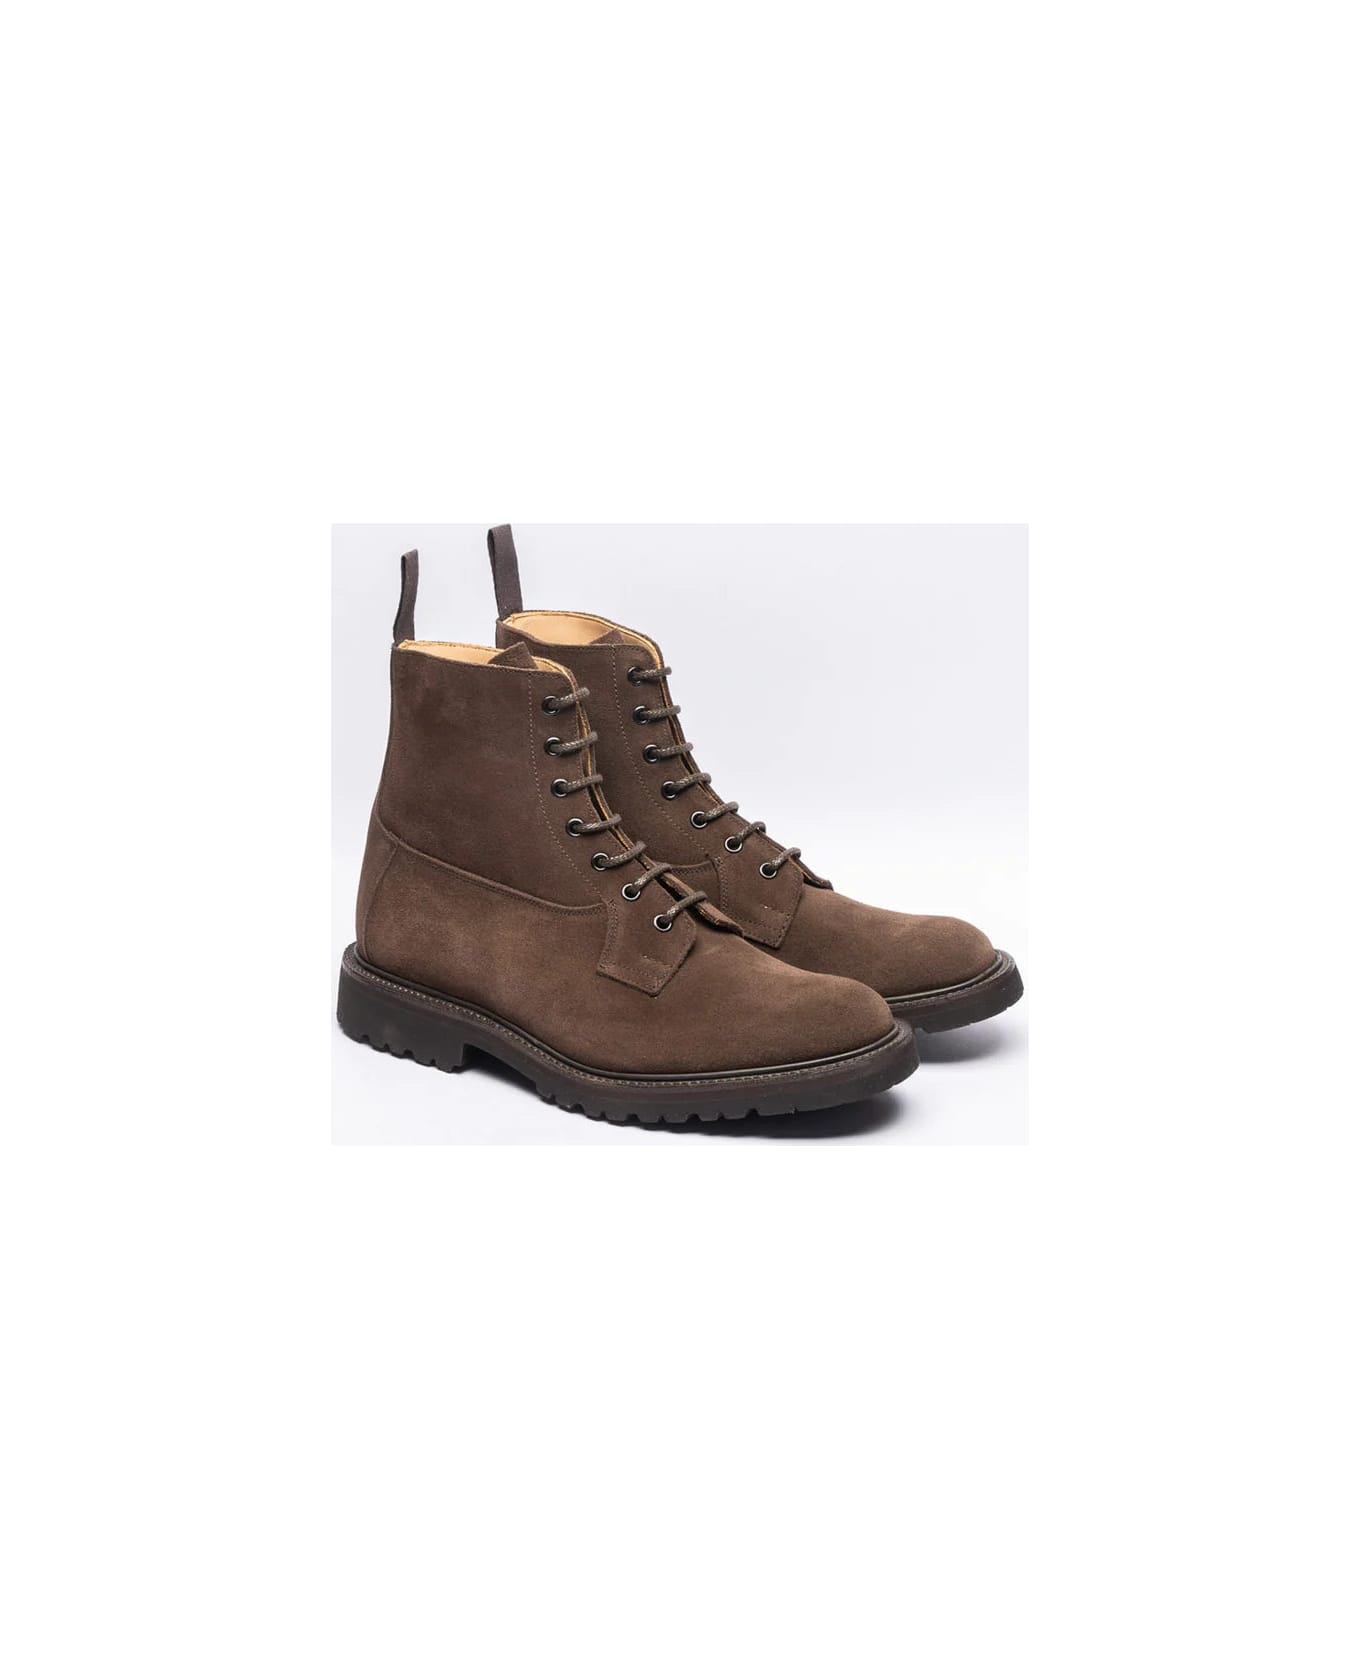 Tricker's Burford Brown Suede Lace-up Boot Vibram Sole - Marrone